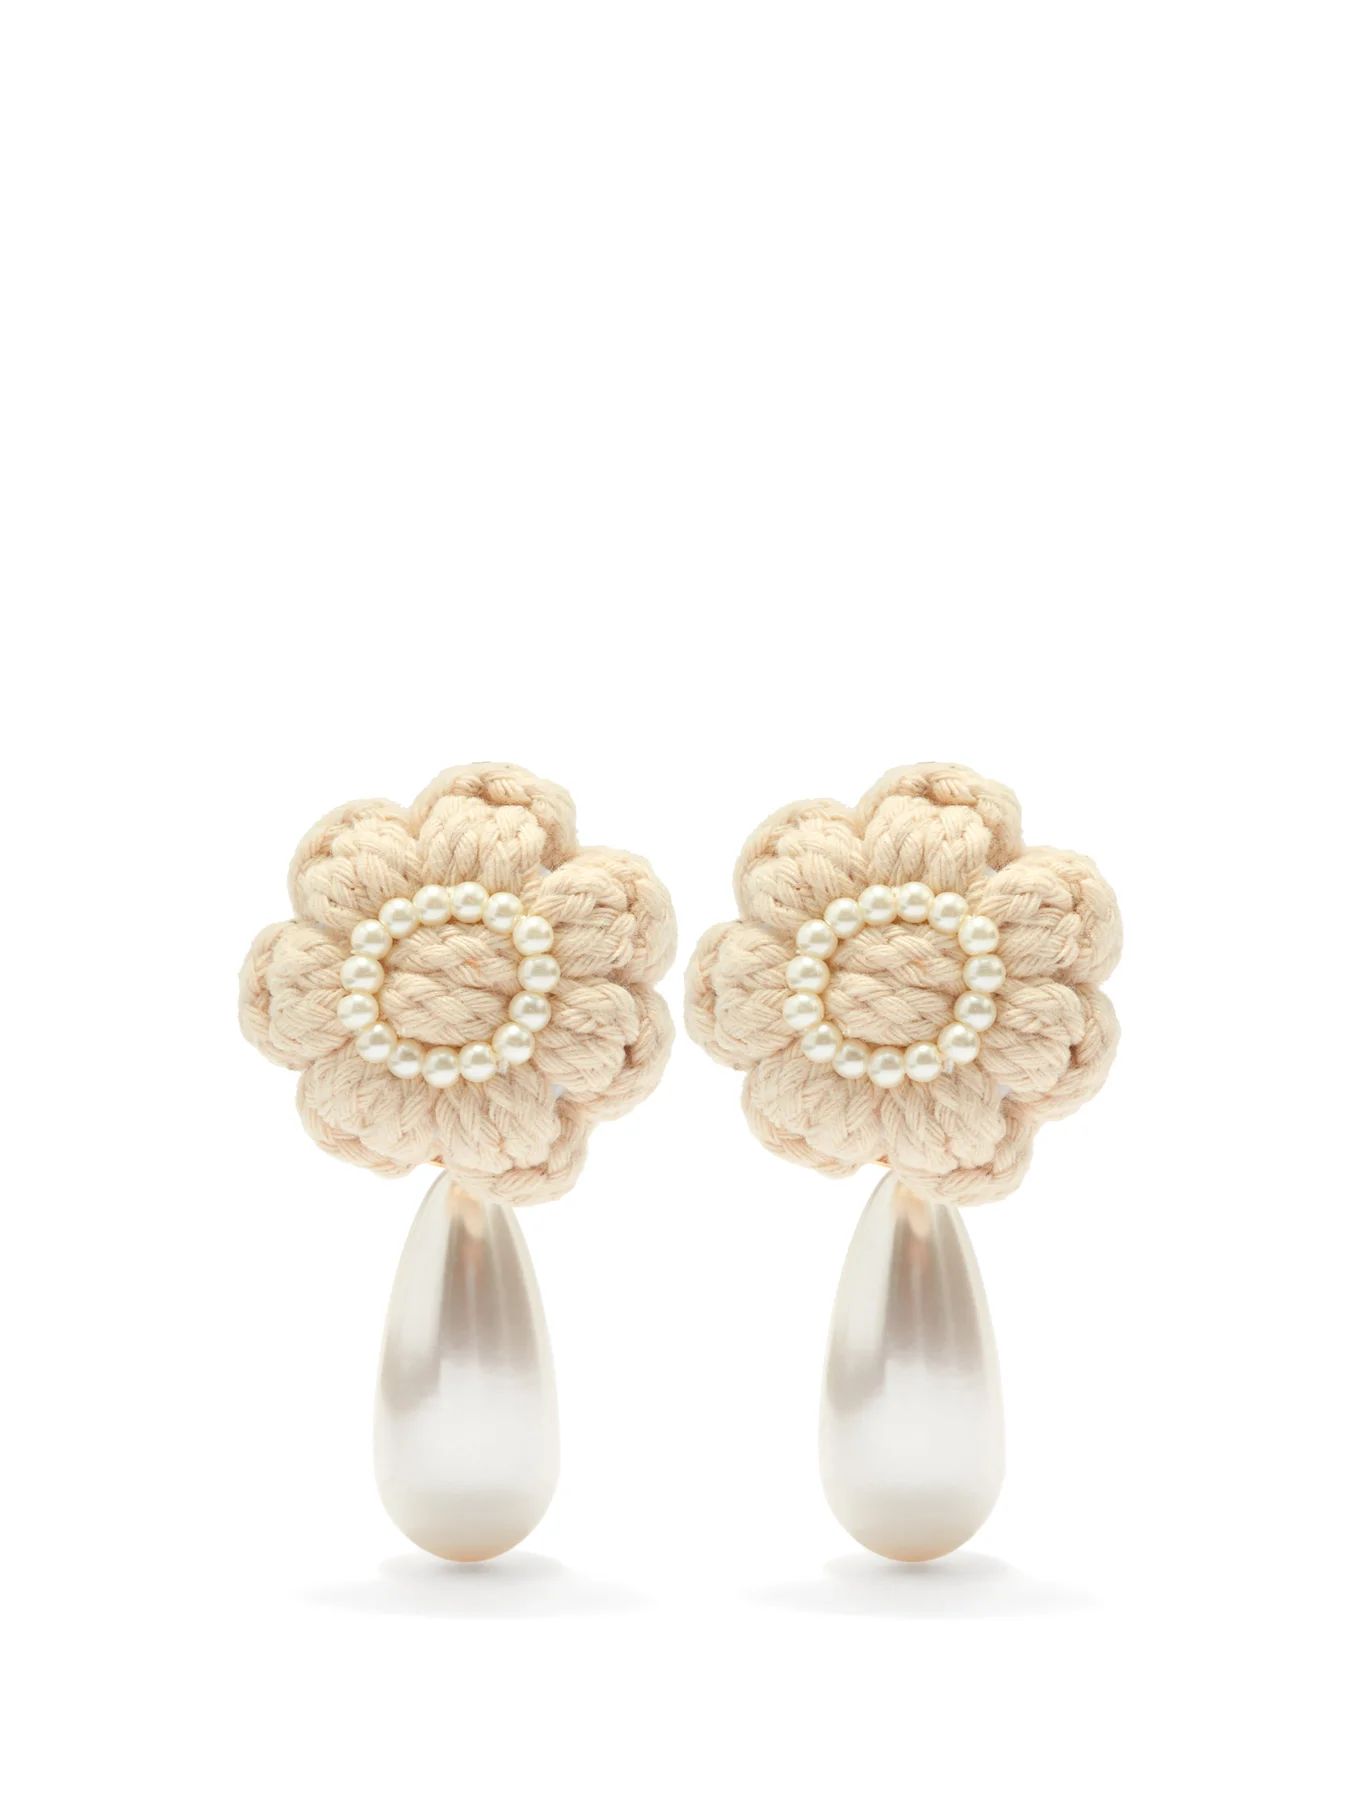 Josef knitted faux-pearl floral clip earrings | Shrimps | Matches (US)